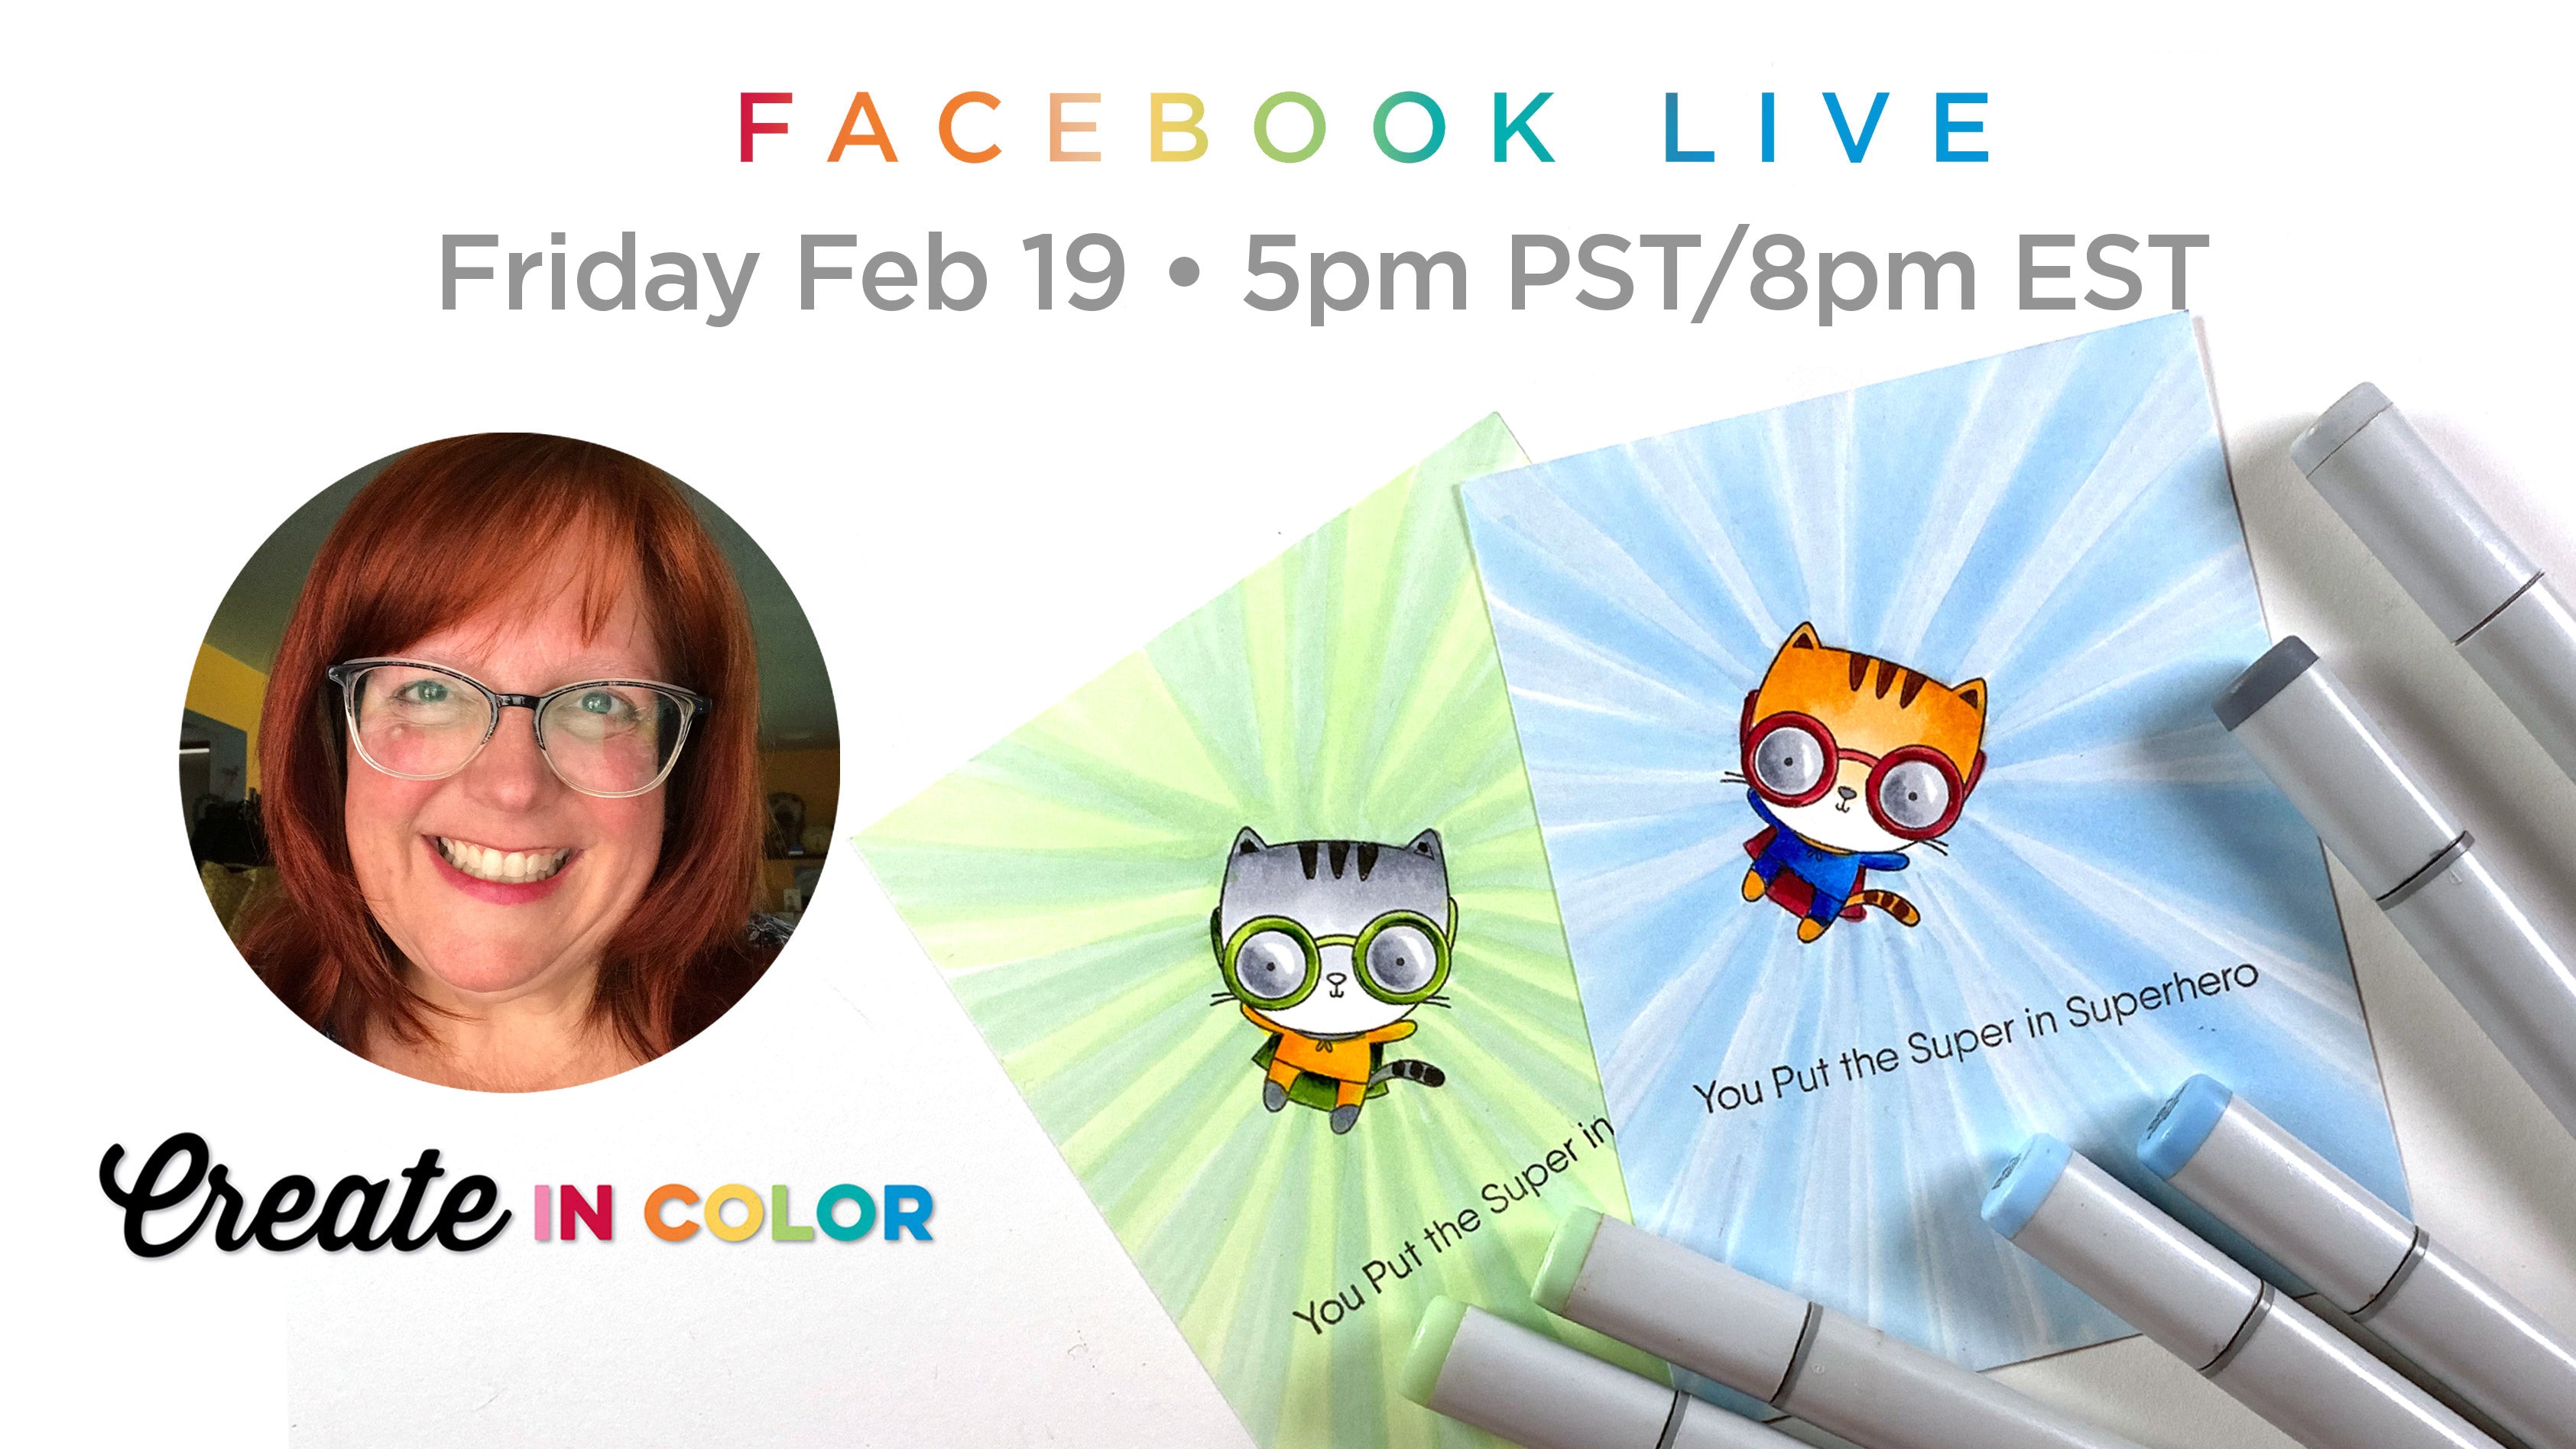 Facebook Live event with Sandy Allnock featuring products from My Favorite Things #mftstamps